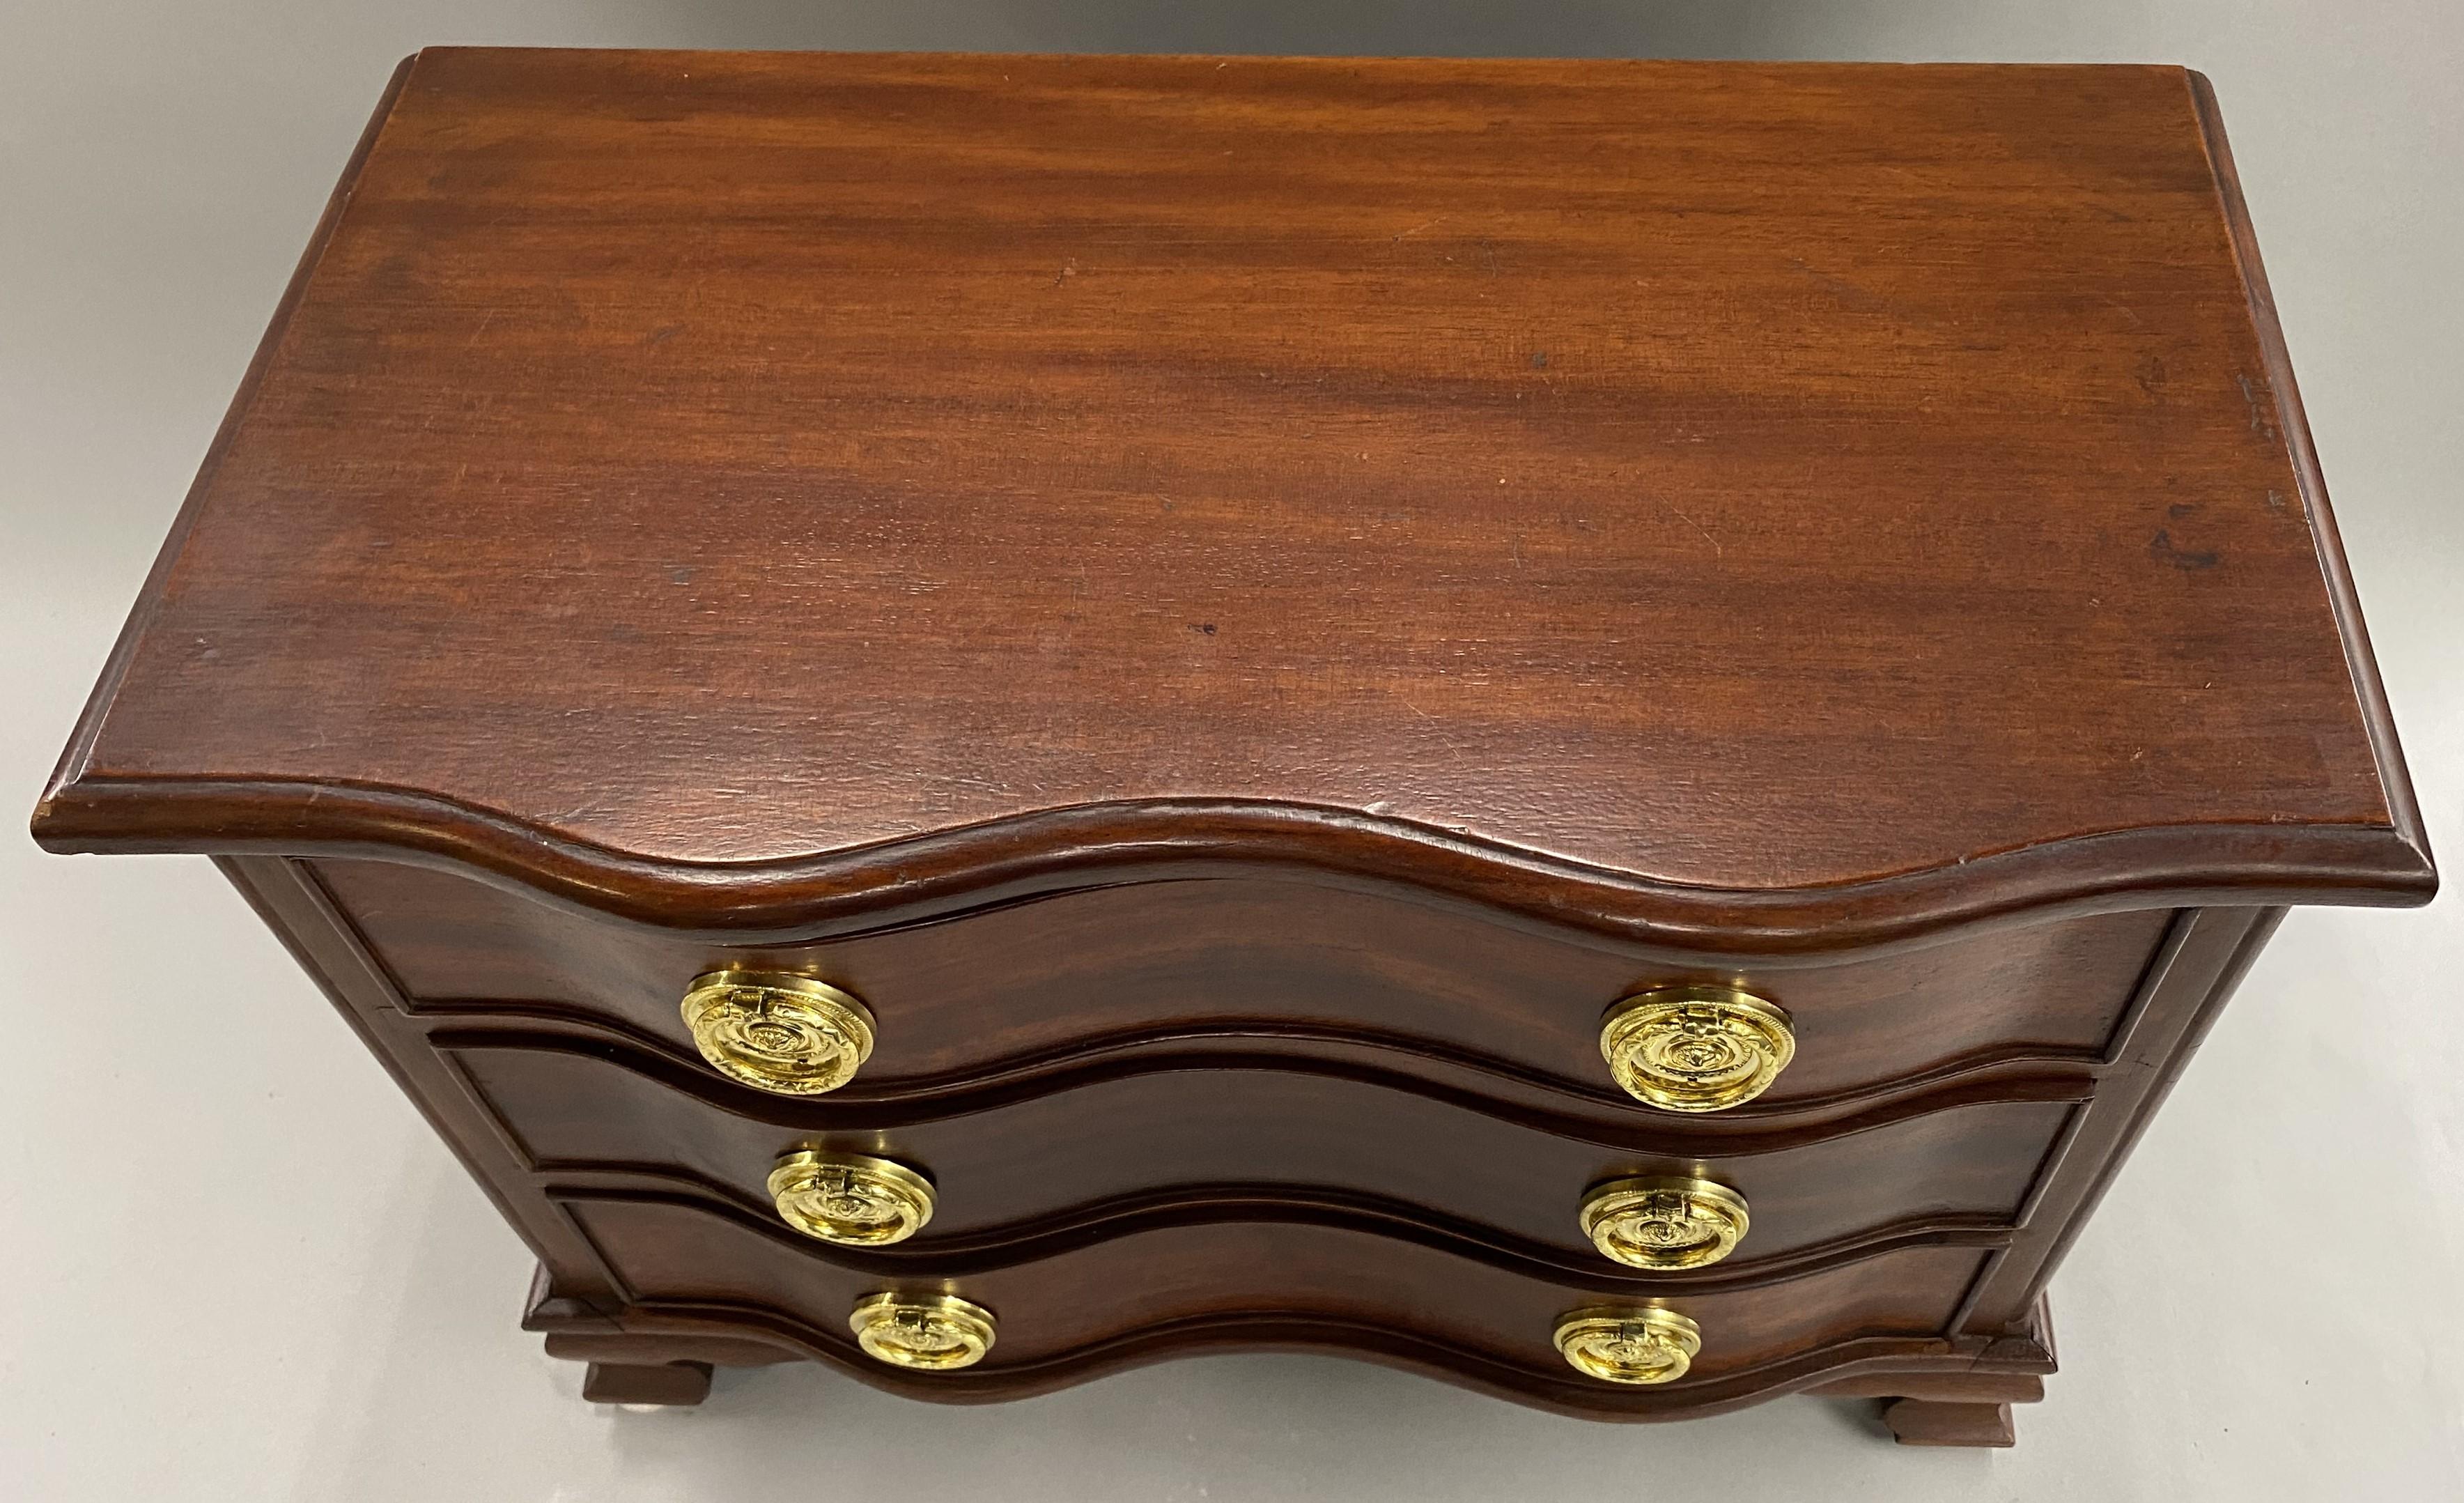 A fine miniature mahogany serpentine three drawer chest in the Chippendale style with molded conforming top edge, round brass pulls and carved ogee feet. Would make a great jewelry chest. Dates to the 20th century in very good condition, with some